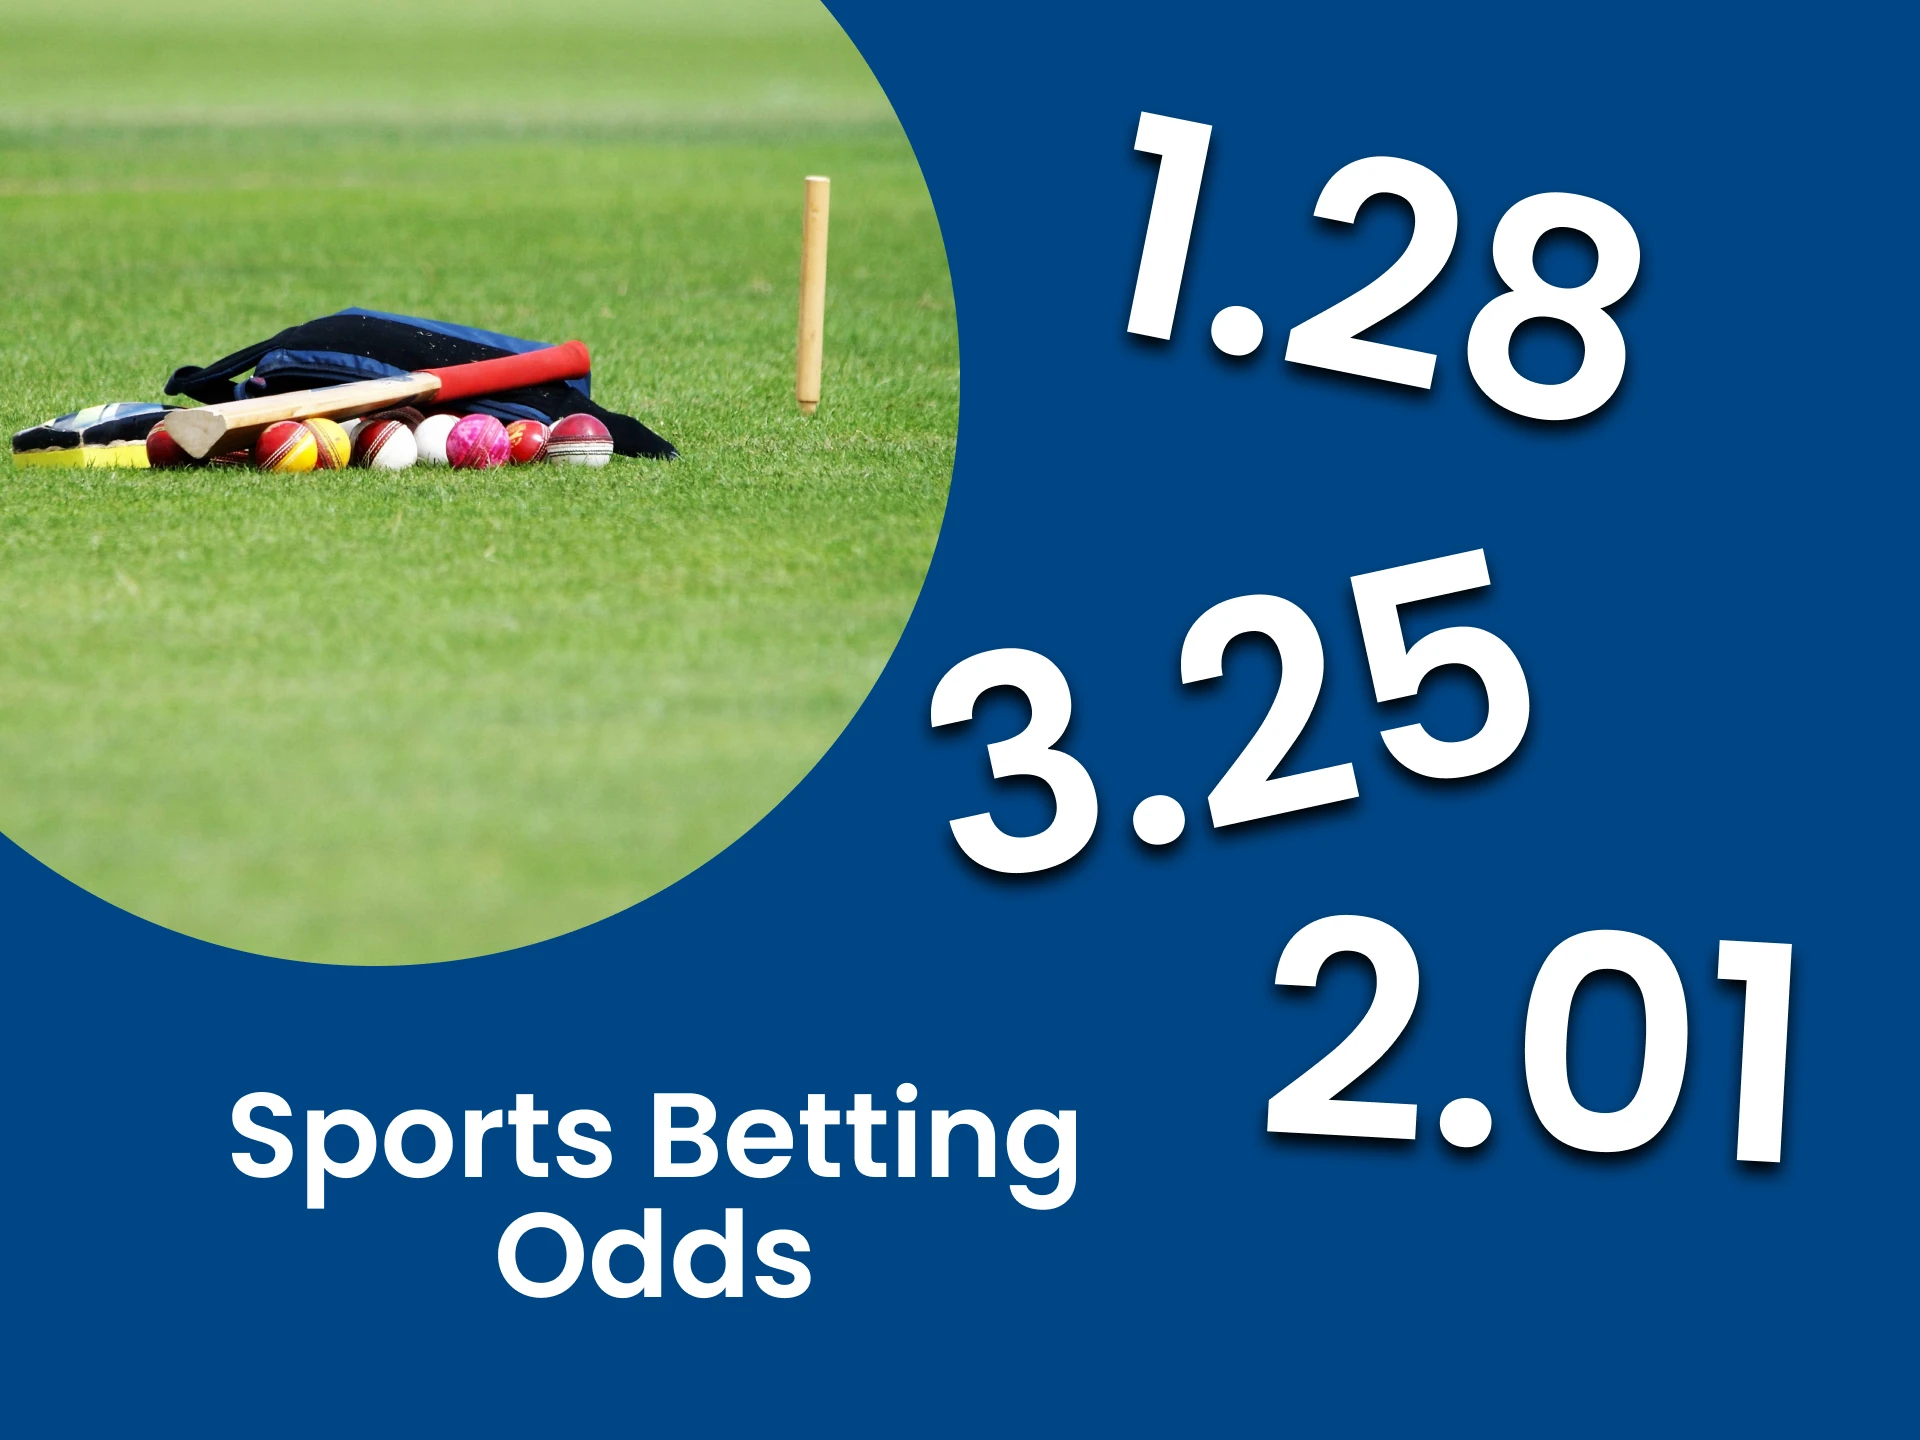 Learn everything about sports betting odds.